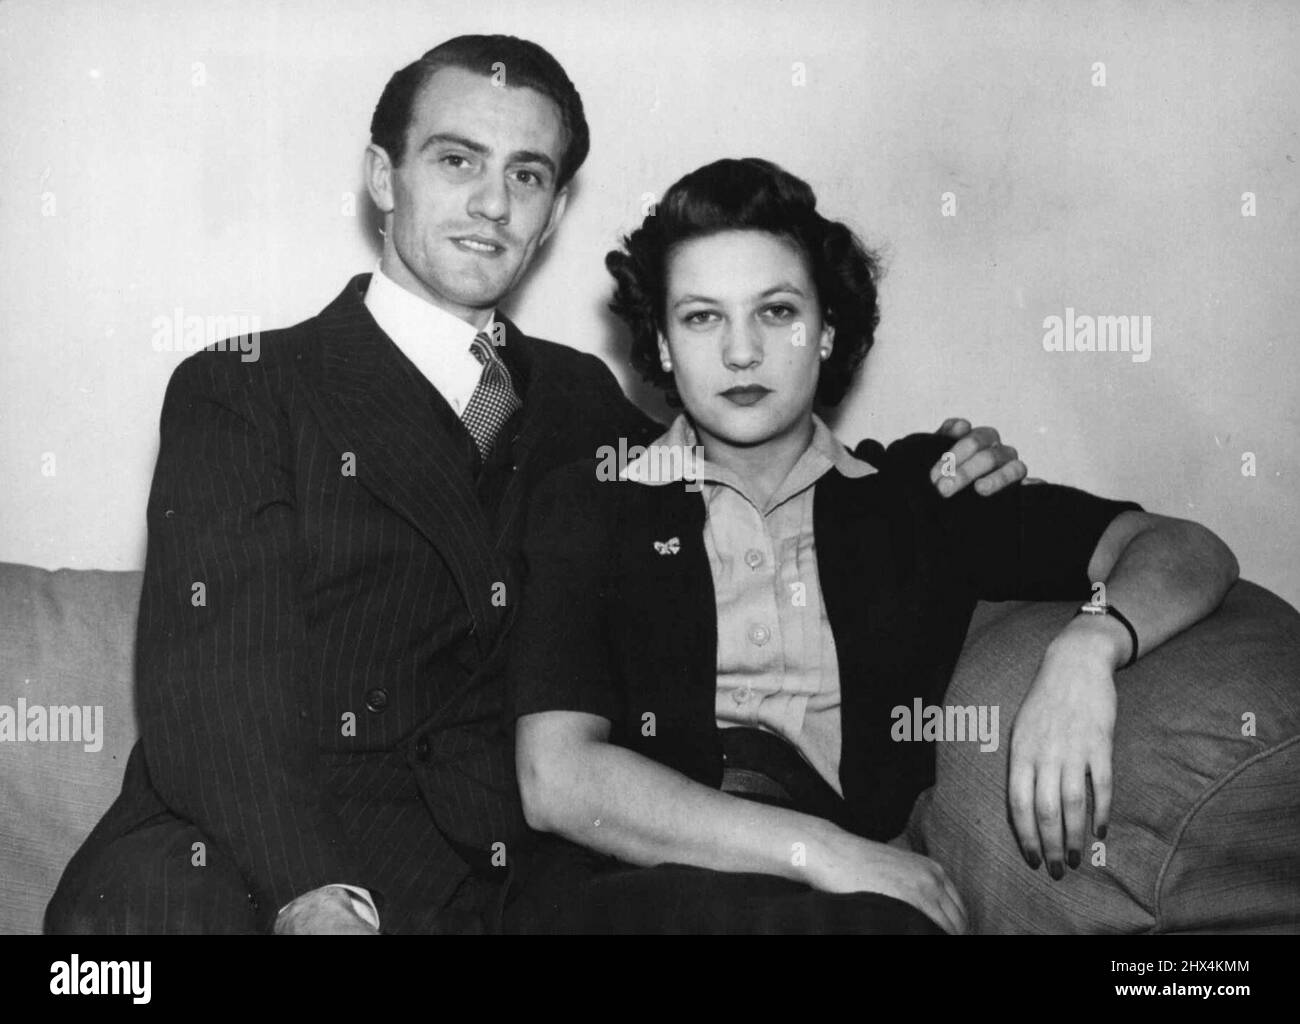 Engagement of Mr. Graham Payn and Miss Sheila Ascoli -- Mr. Graham Payn and Miss Sheila Ascoli photographed in London today. The engagement has been announced of Mr. Graham Payn to Miss Sheila Ascoli. Mr. Payn, a principal in 'Magic Carpet' at the Prince's Theatre, London, joined the Territorials in April 1939, and was discharged from the London Irish Rifles owing to ill-health in 1940. Born in South Africa, he made a reputation as a boy soprano throughout that country in 1930. Miss Ascoli has been in the W.R.E.N. for 2½ years. She is the daughter of the late George Ascoli and Mrs. Stock Photo